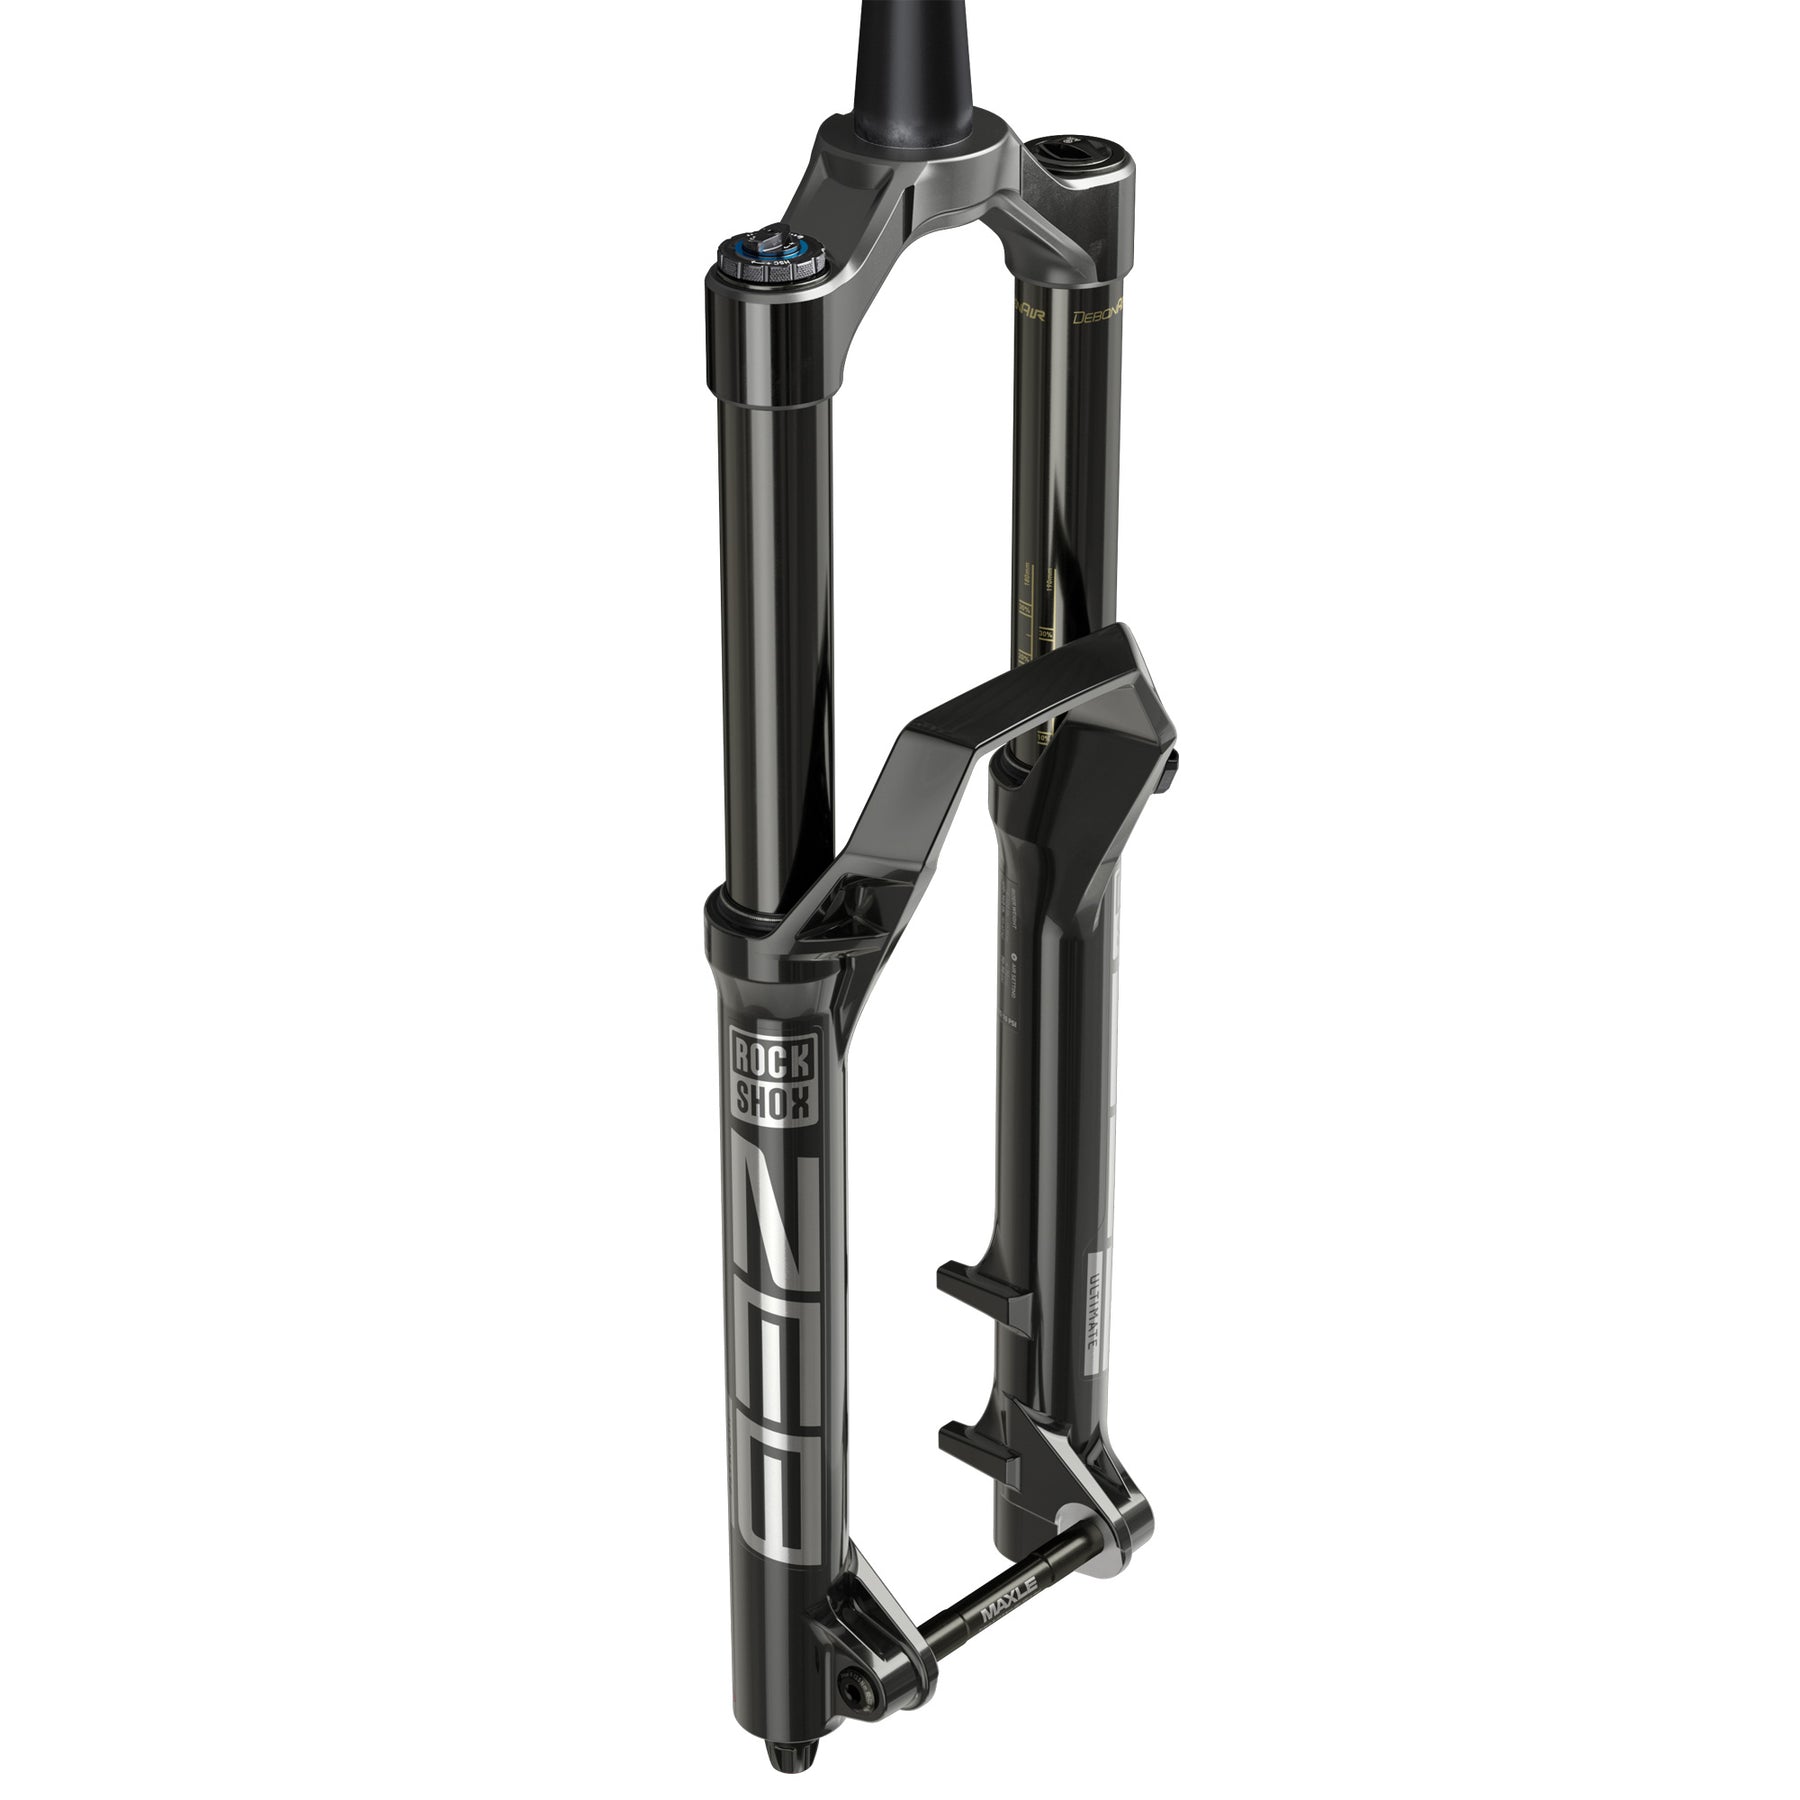 ROCKSHOX Fork Zeb Ultimate Charger 2.1 Rc2 - Crown 29" Boost 15X110